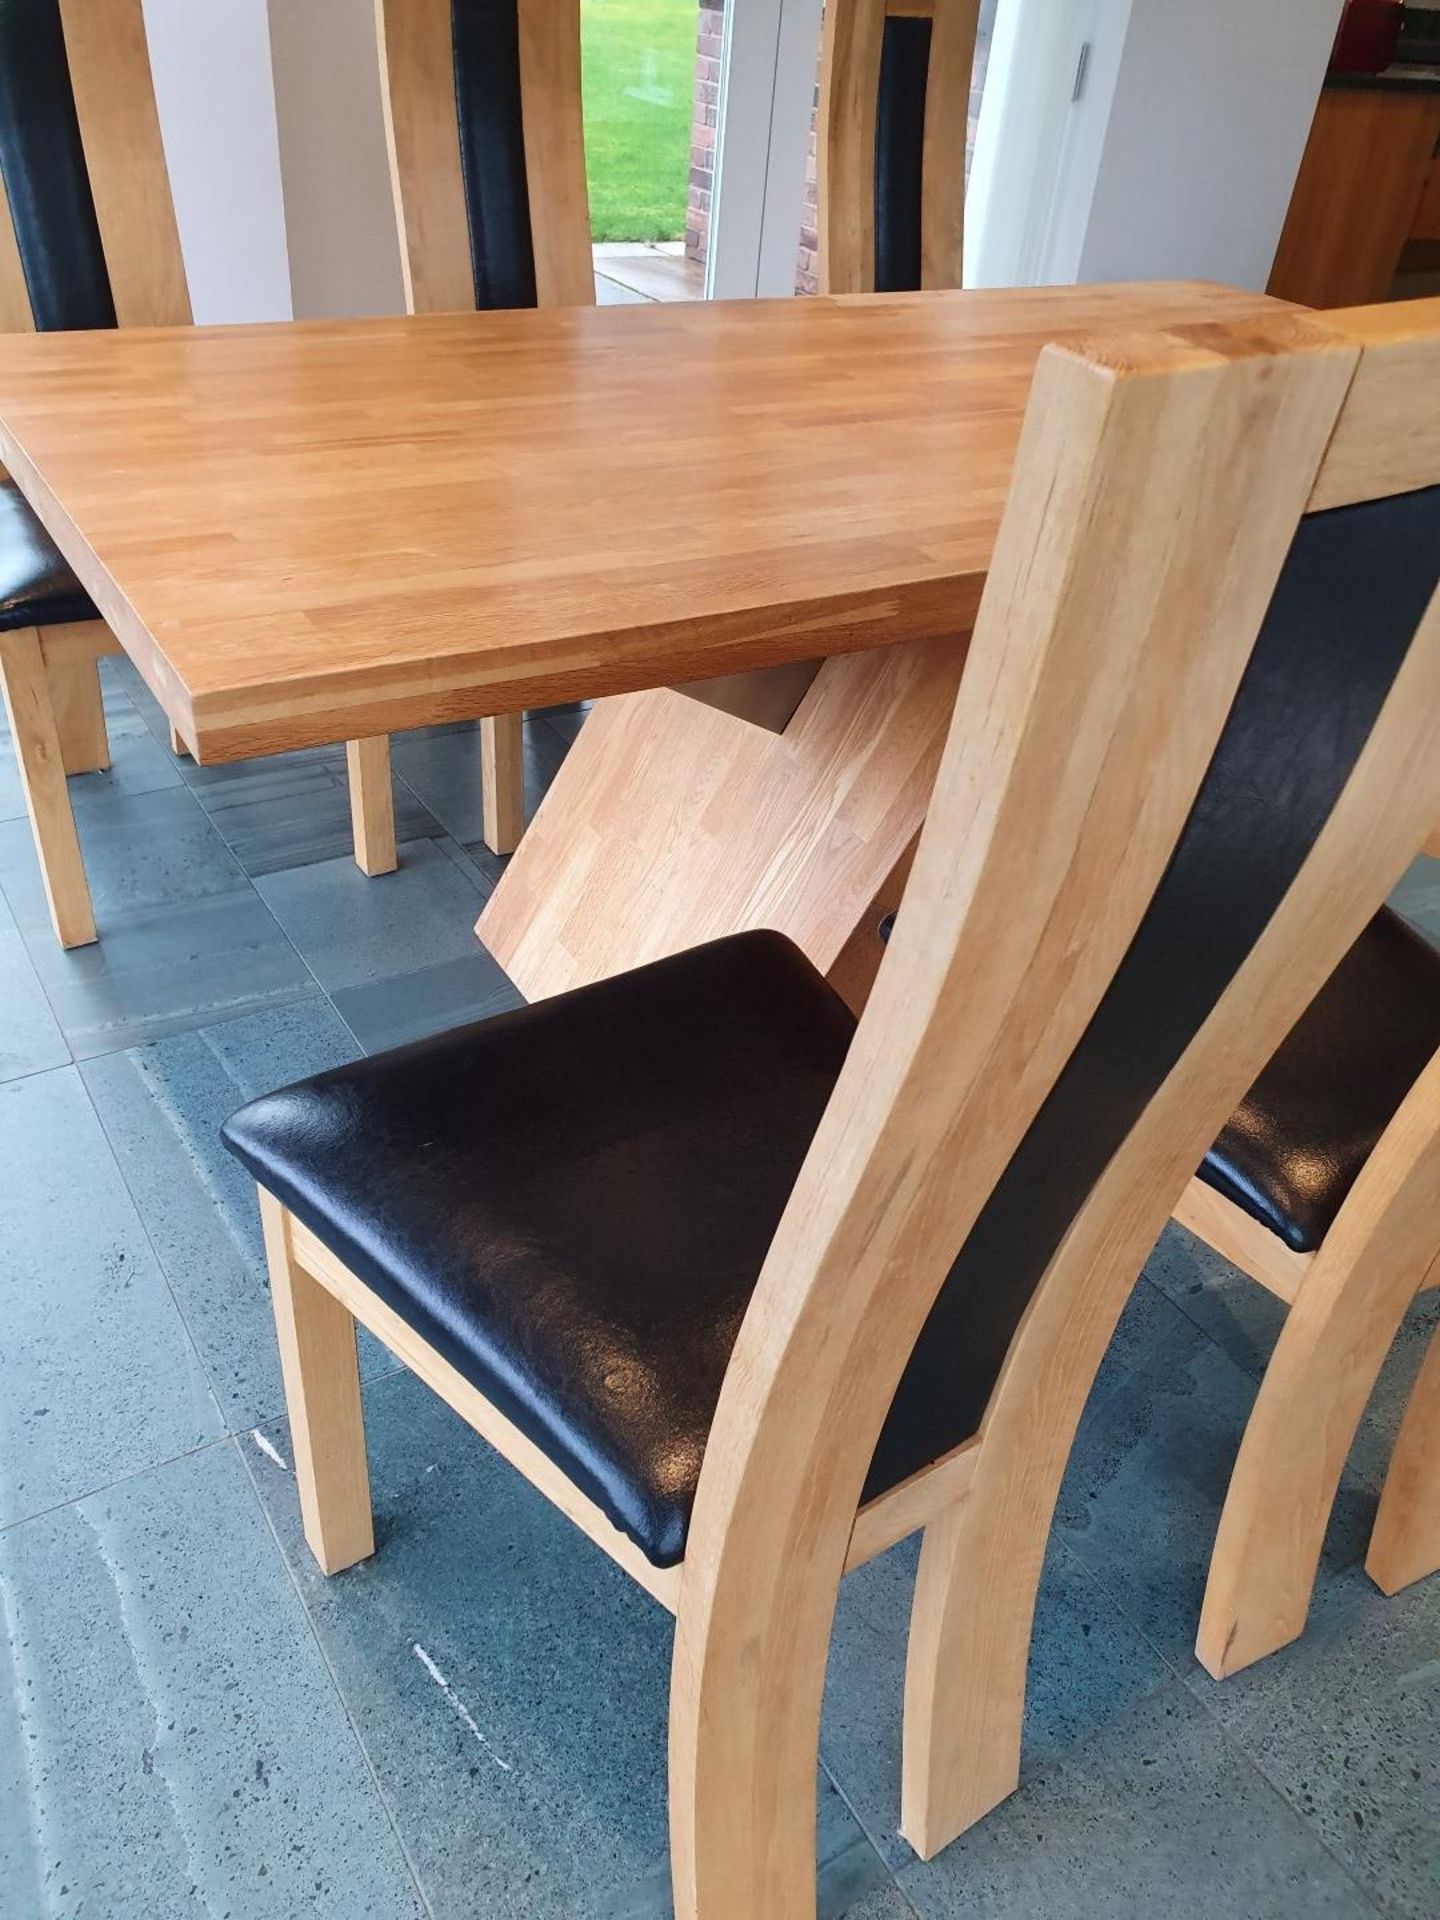 1 x Solid Oak 1.8 Metre Dining Table With 6 x High Back Dining Chairs - Pre-owned In Great Condition - Image 10 of 12